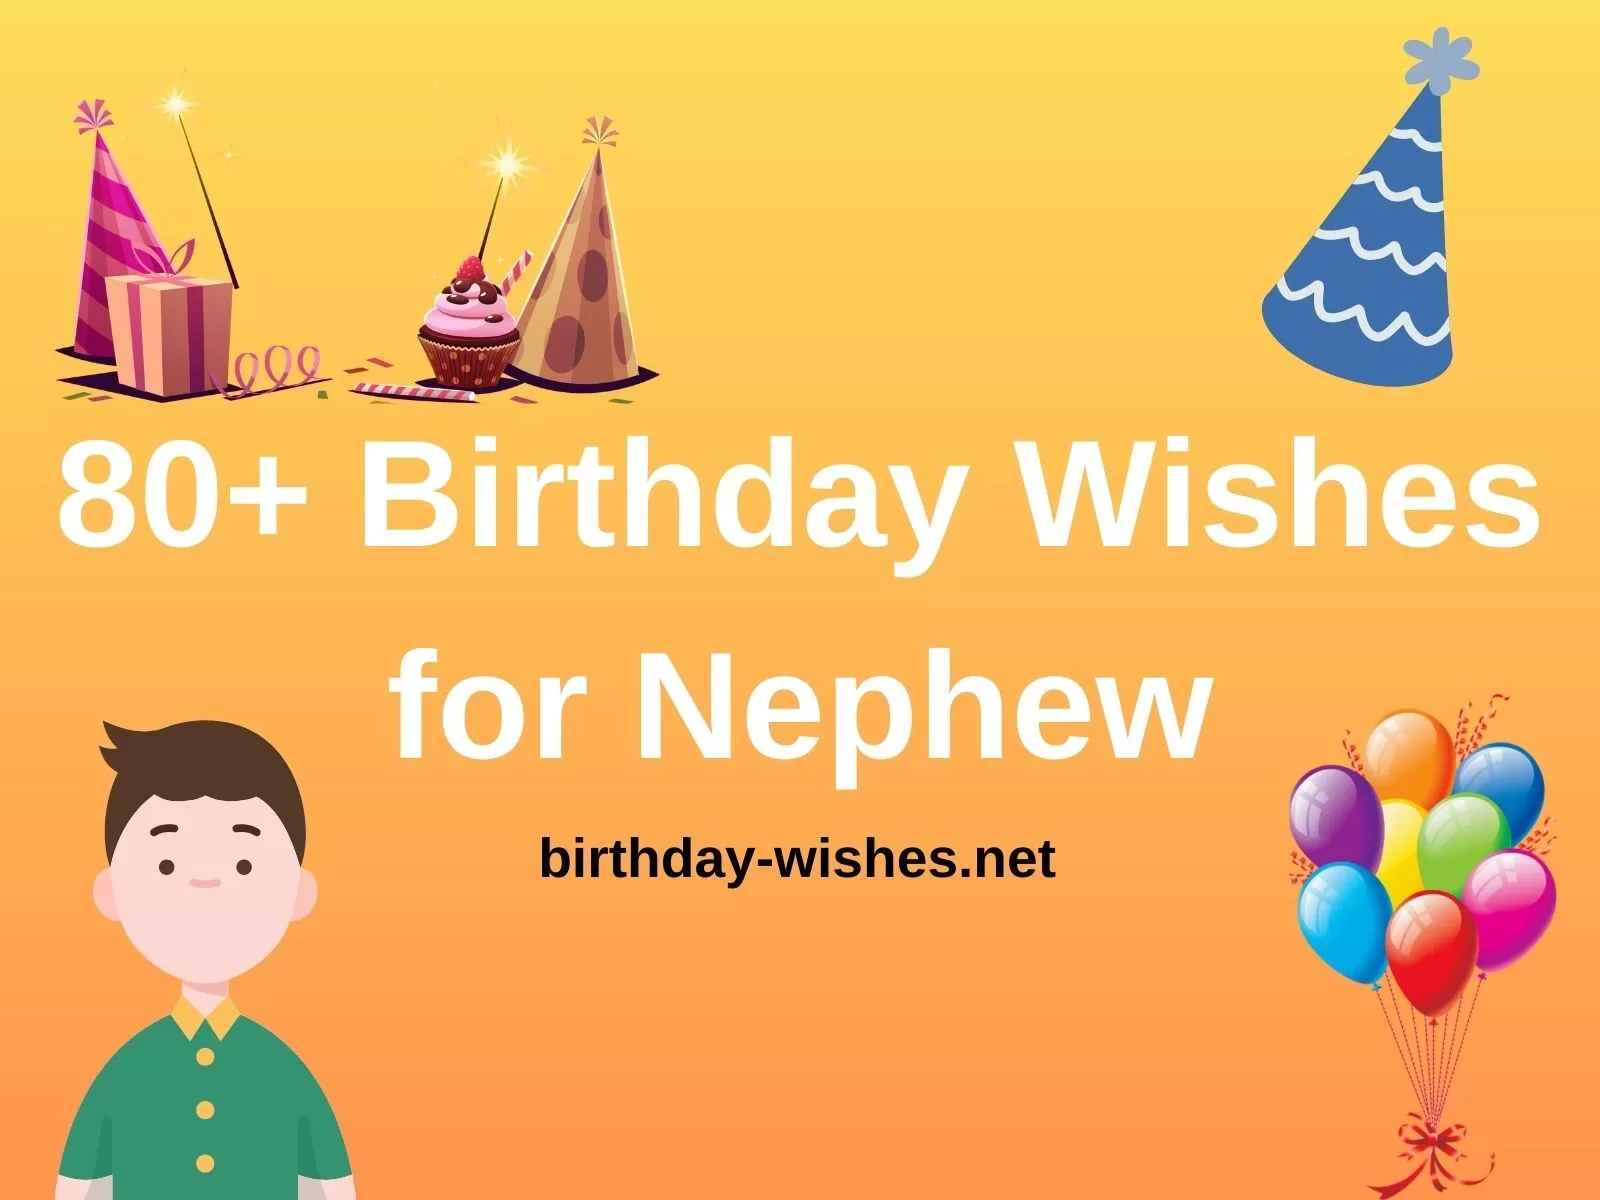 80+ Birthday Wishes for Nephew that will make him Happy